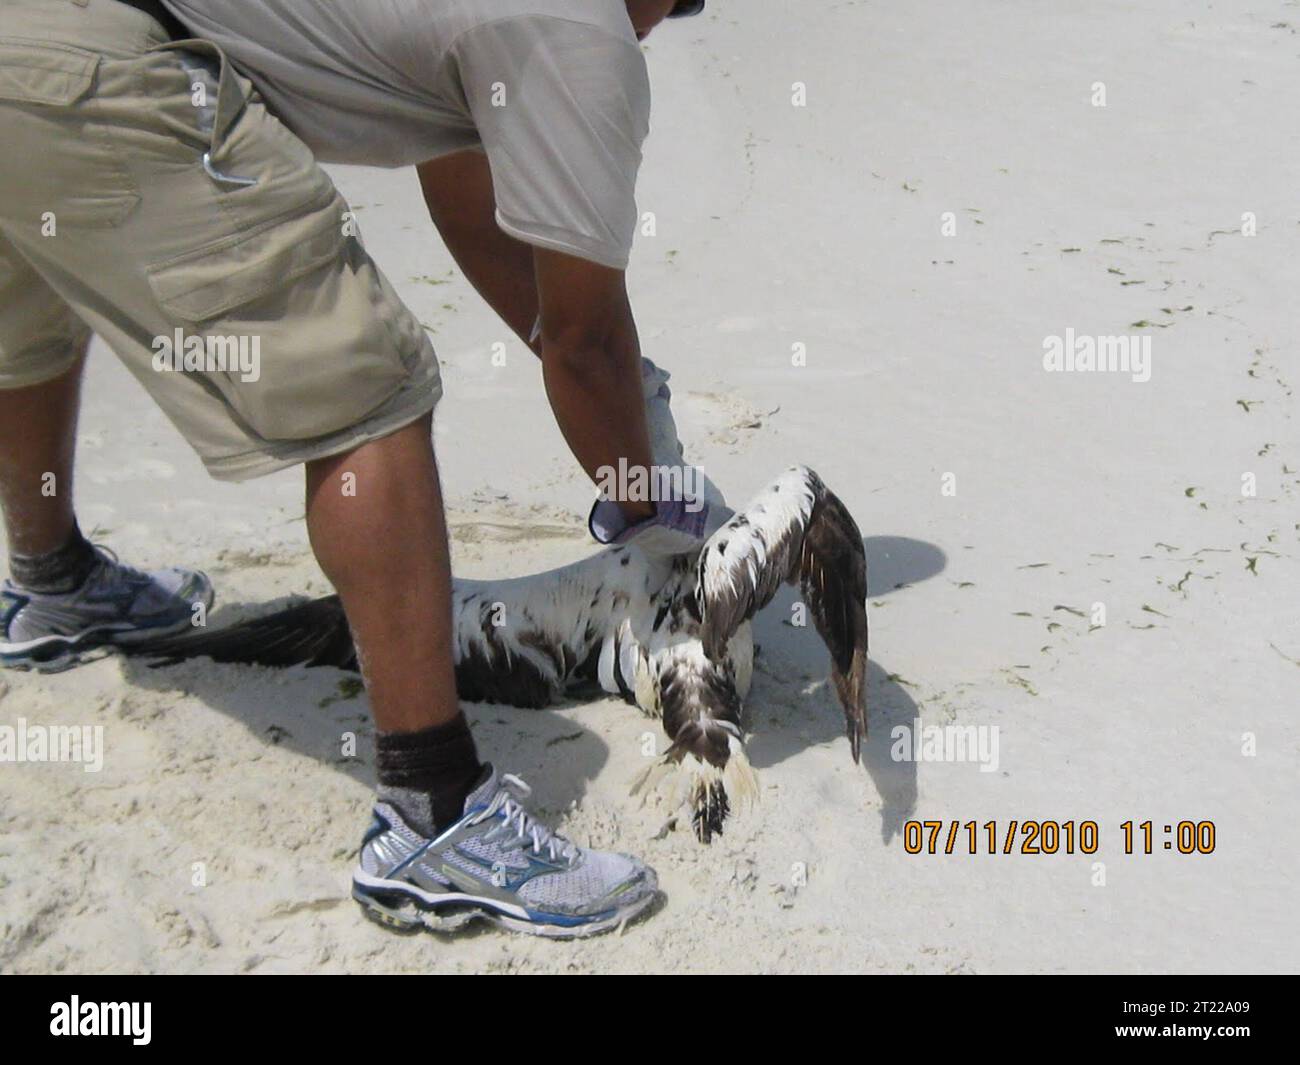 July 11, 2010 Destin, FL - A Northern Gannet with no visible oil was rescued near Destin Harbor, FL. Day One of deployment is 'training day'. Employees are provided thorough orientation and training in the safe handling of wildlife and evidence. Photo by. Subjects: Birds; Deepwater Horizon Oil Spill. Stock Photo